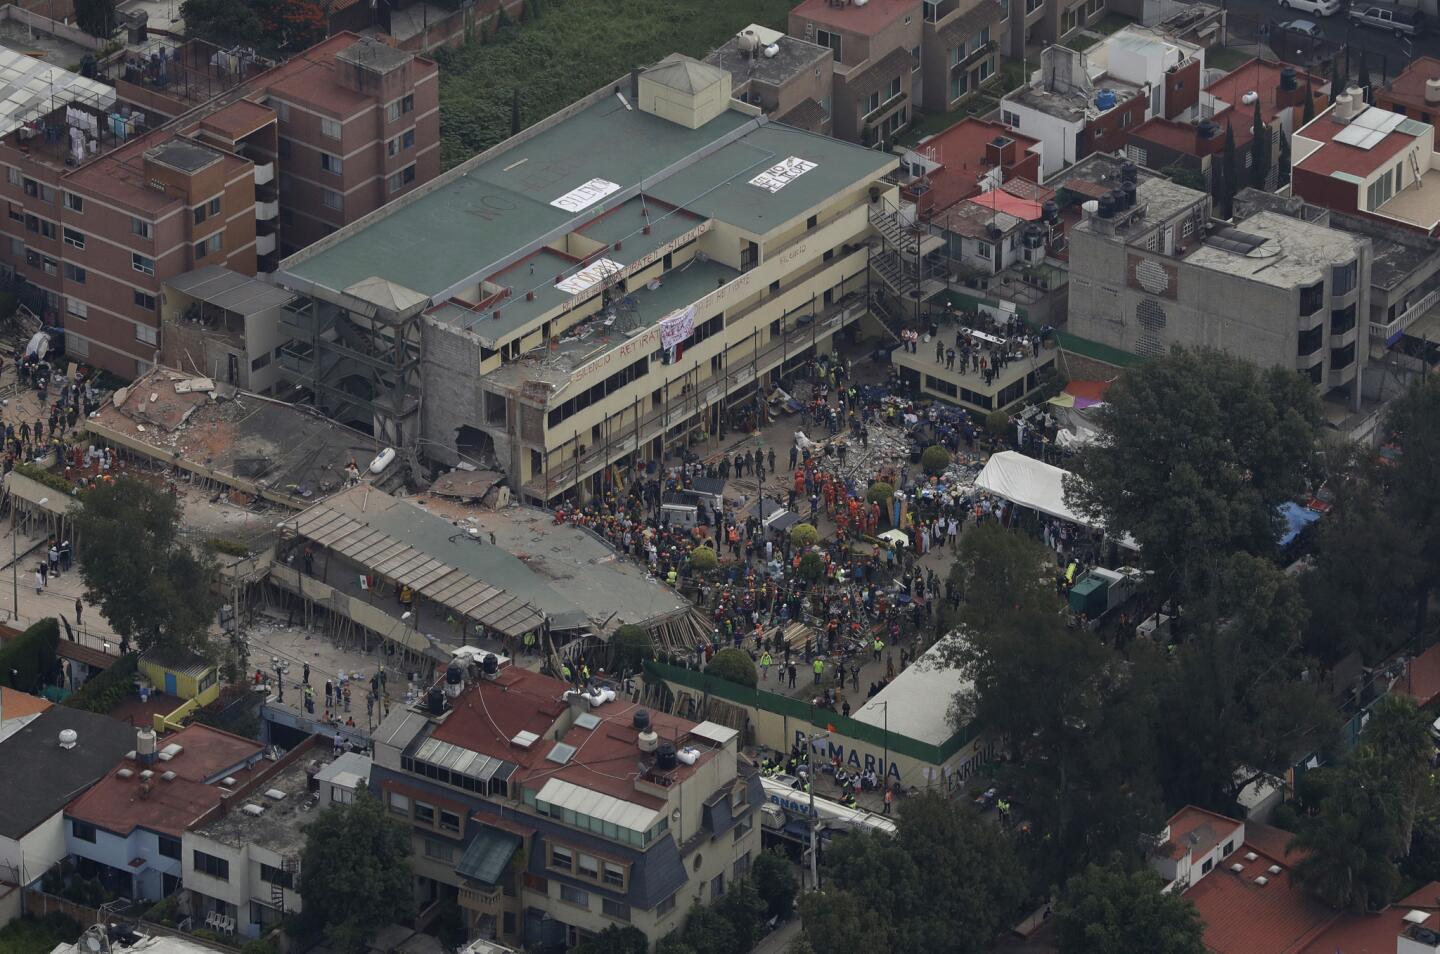 Rescuers work to free those trapped in collapsed school in Mexico City